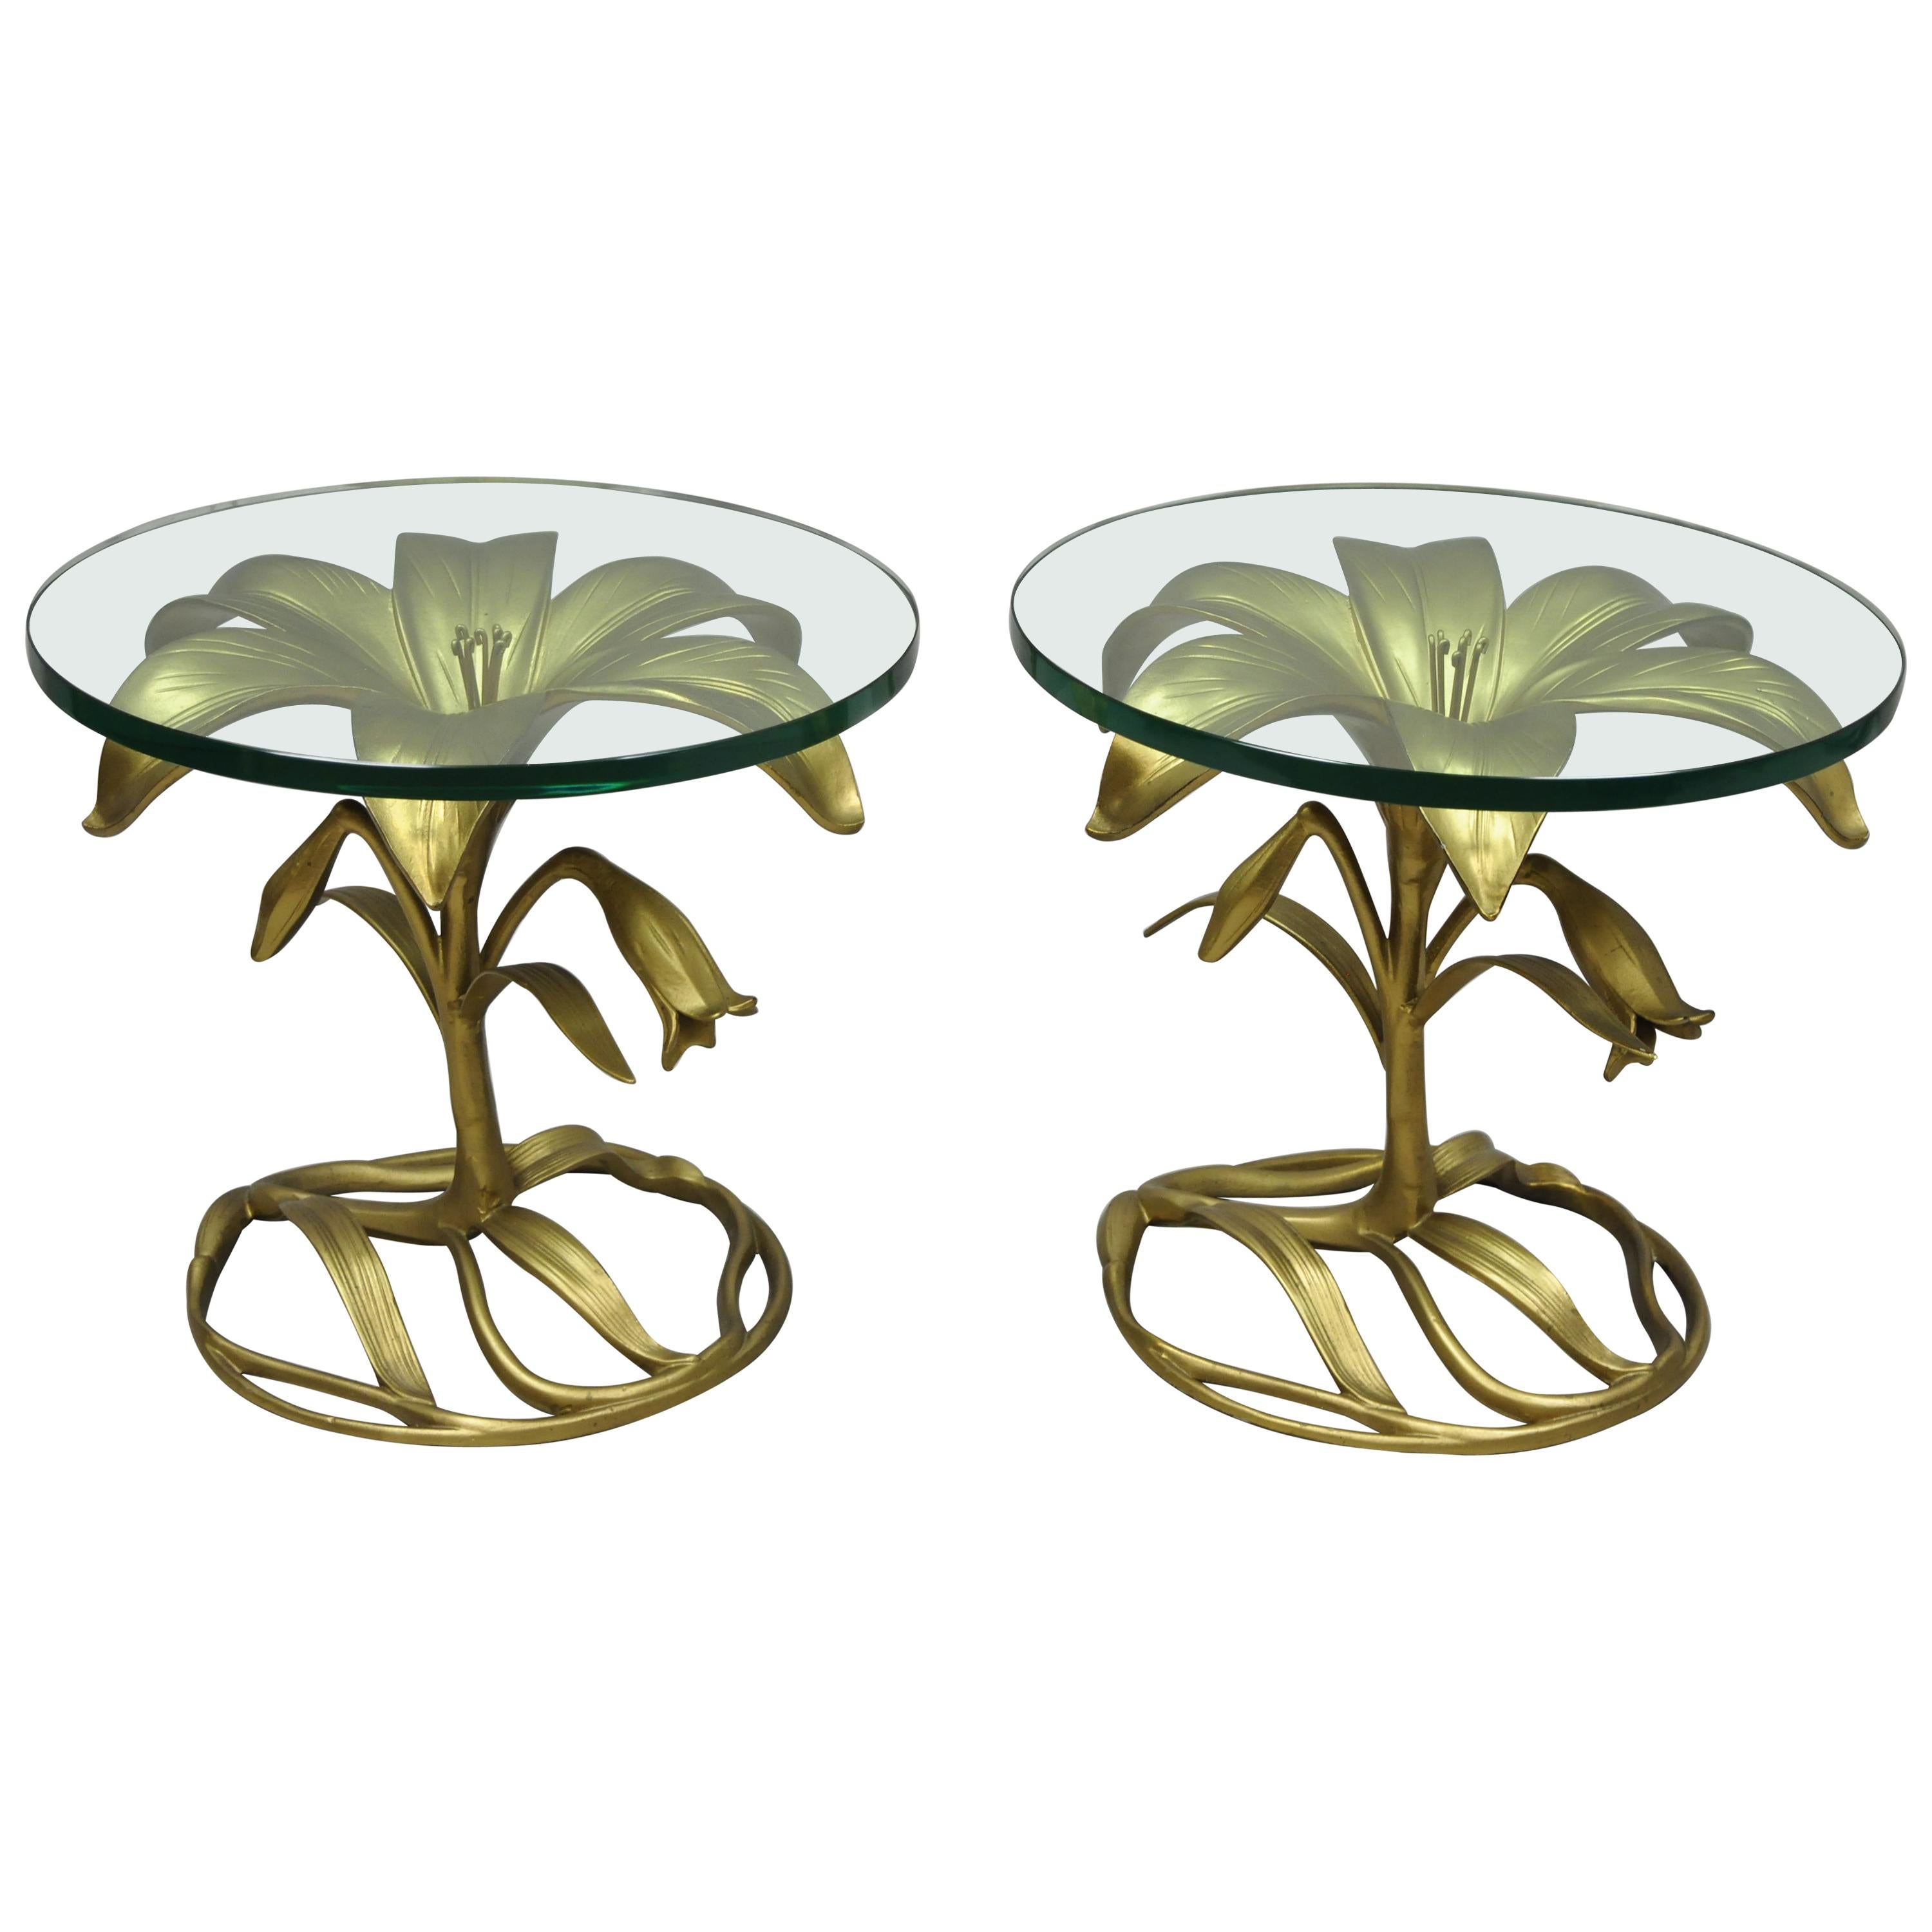 Pair of Vintage Arthur Court Gold Lily Flower Leaf Round Glass Top Side Tables